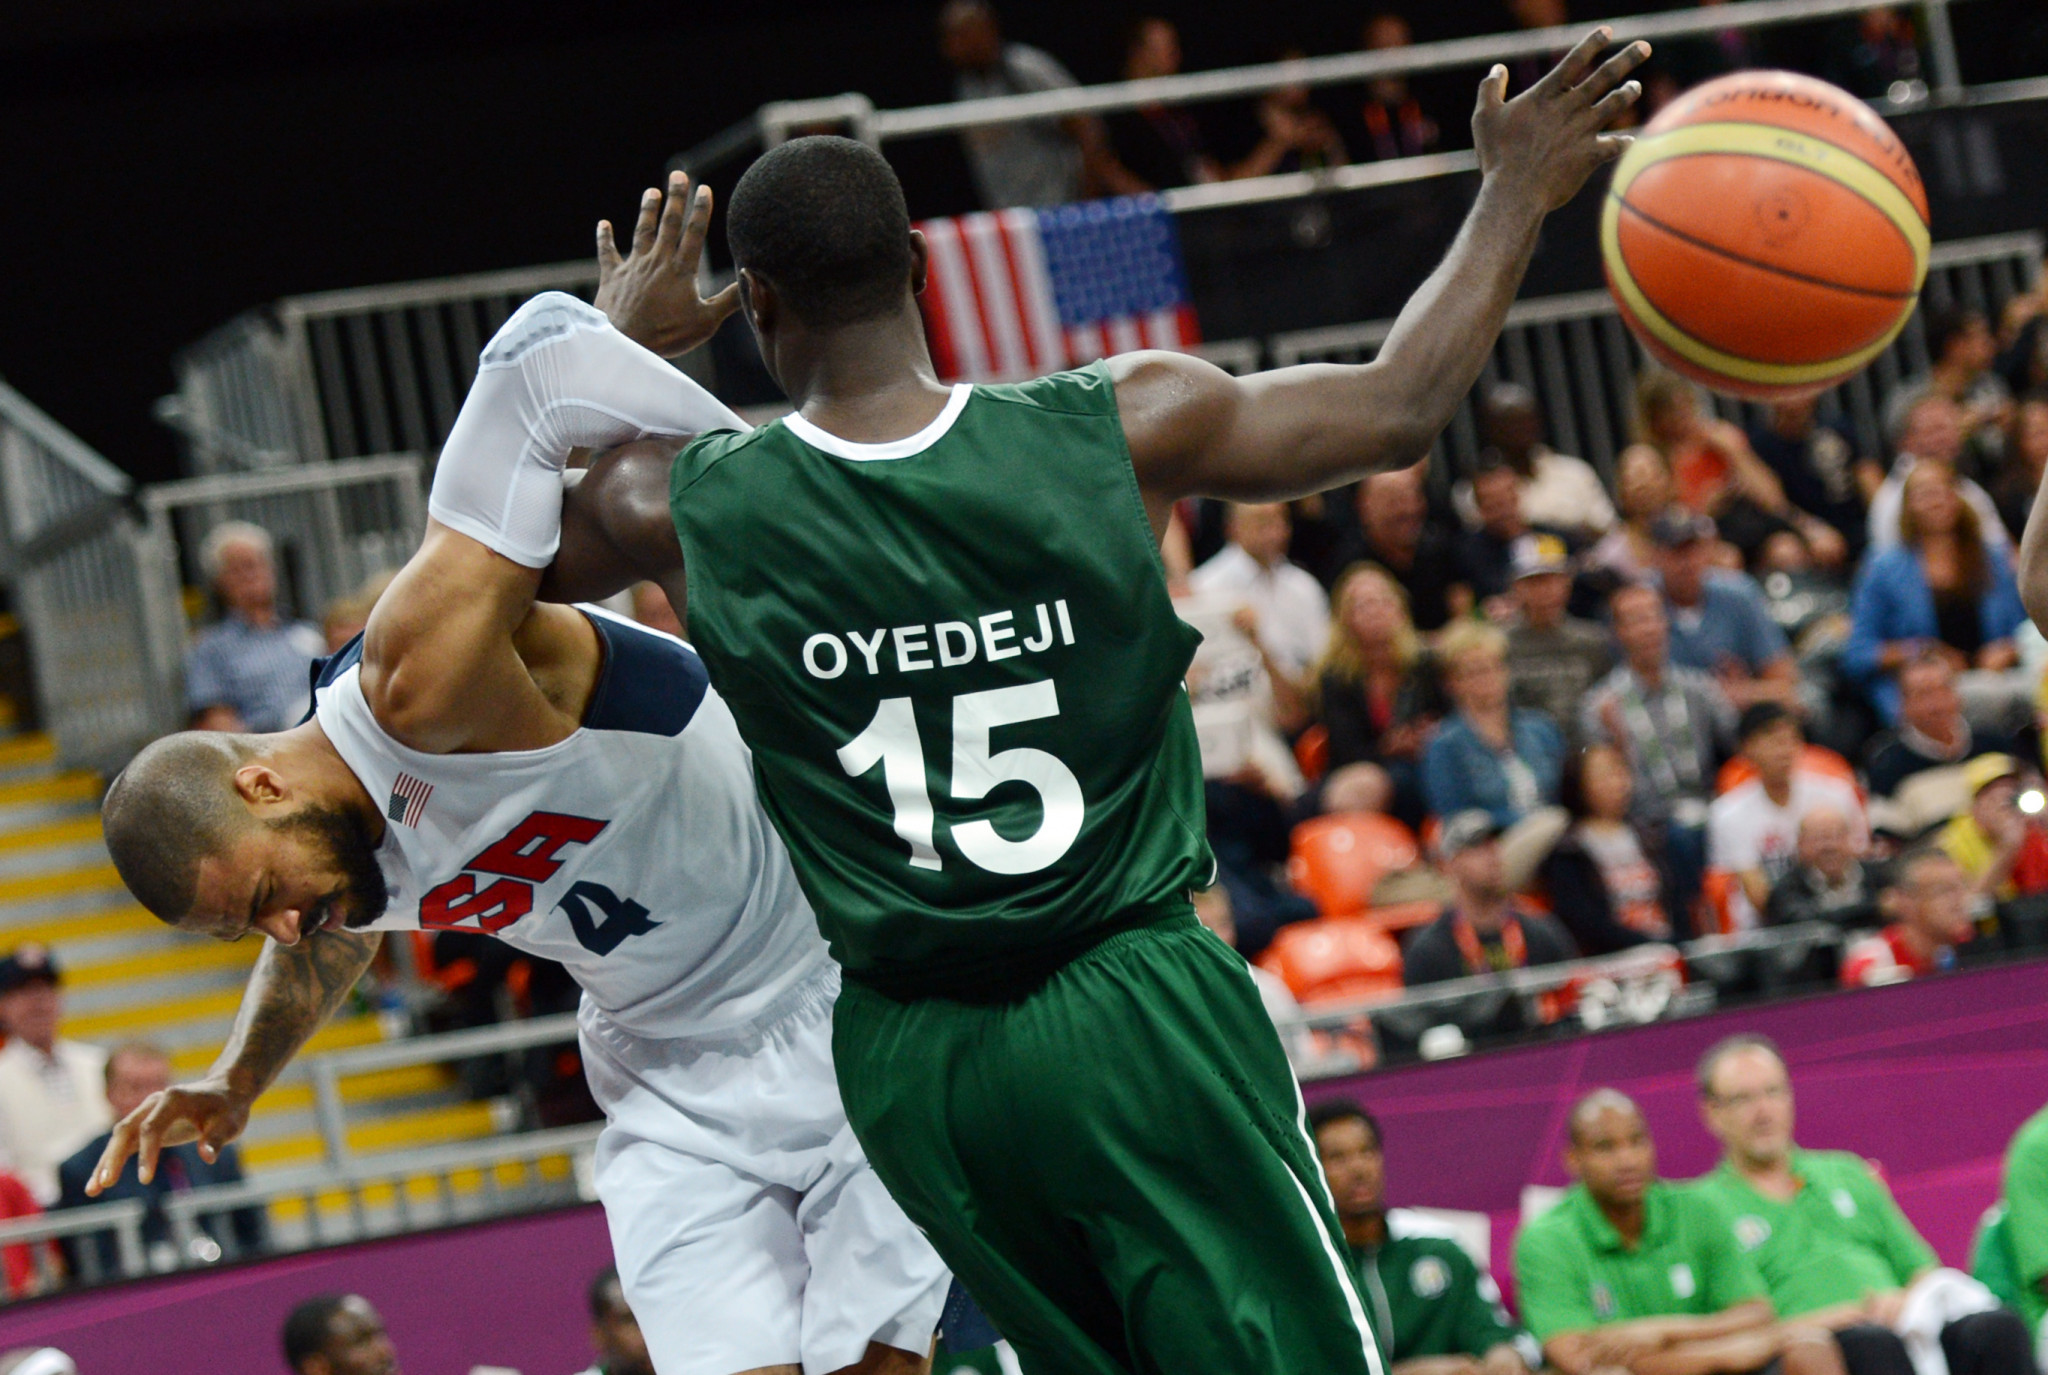 Nigeria's Olympic basketball player Olumide Oyedeji is the chairman of the Athletes' Commission ©Getty Images